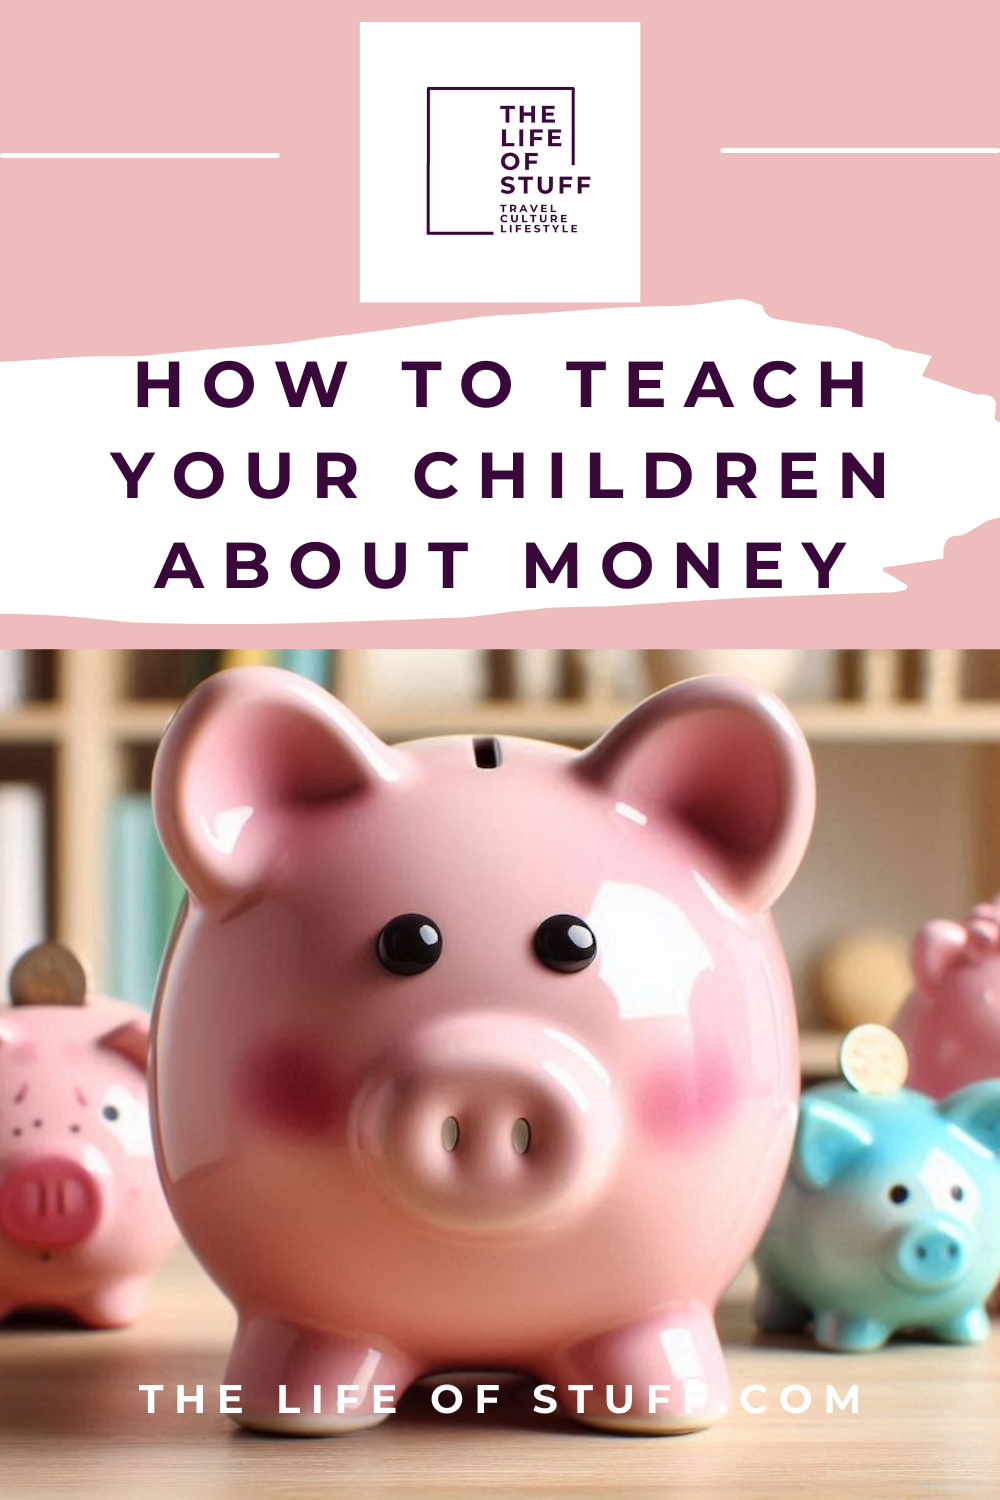 How to Teach Your Children About Money - The Life of Stuff